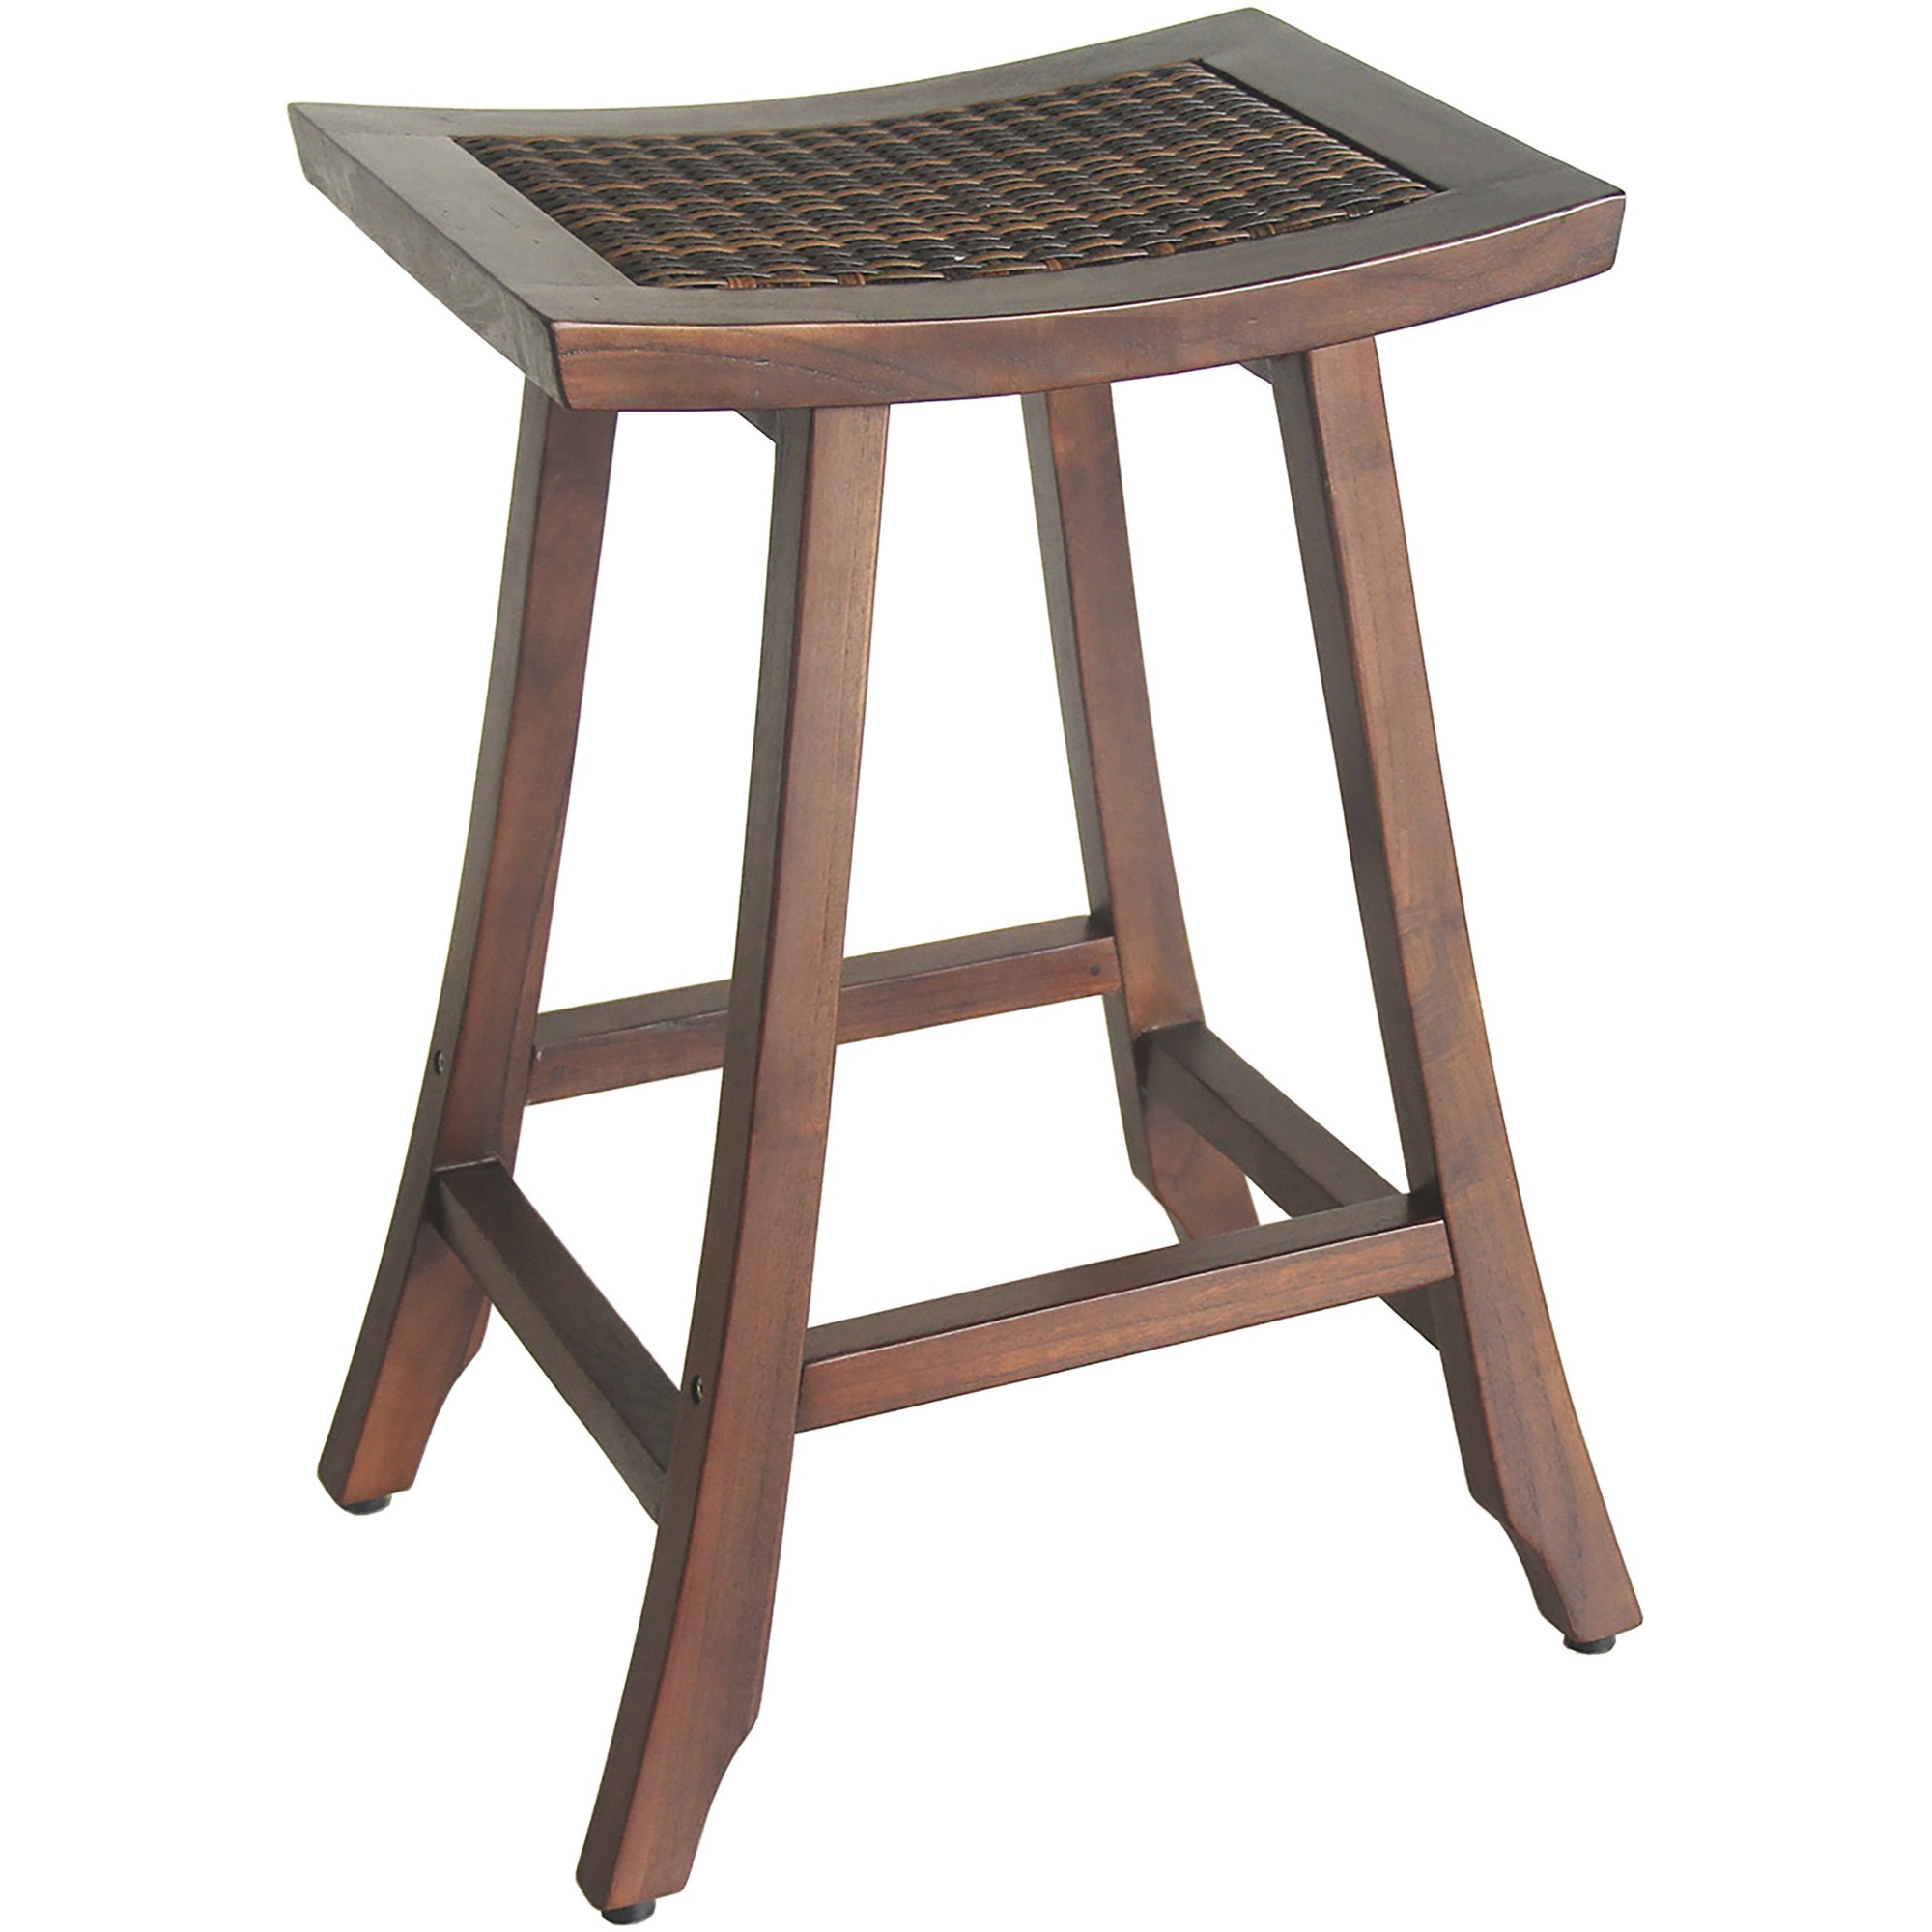 Compact Teak Shower Outdoor Bench with Rattan in Brown Finish